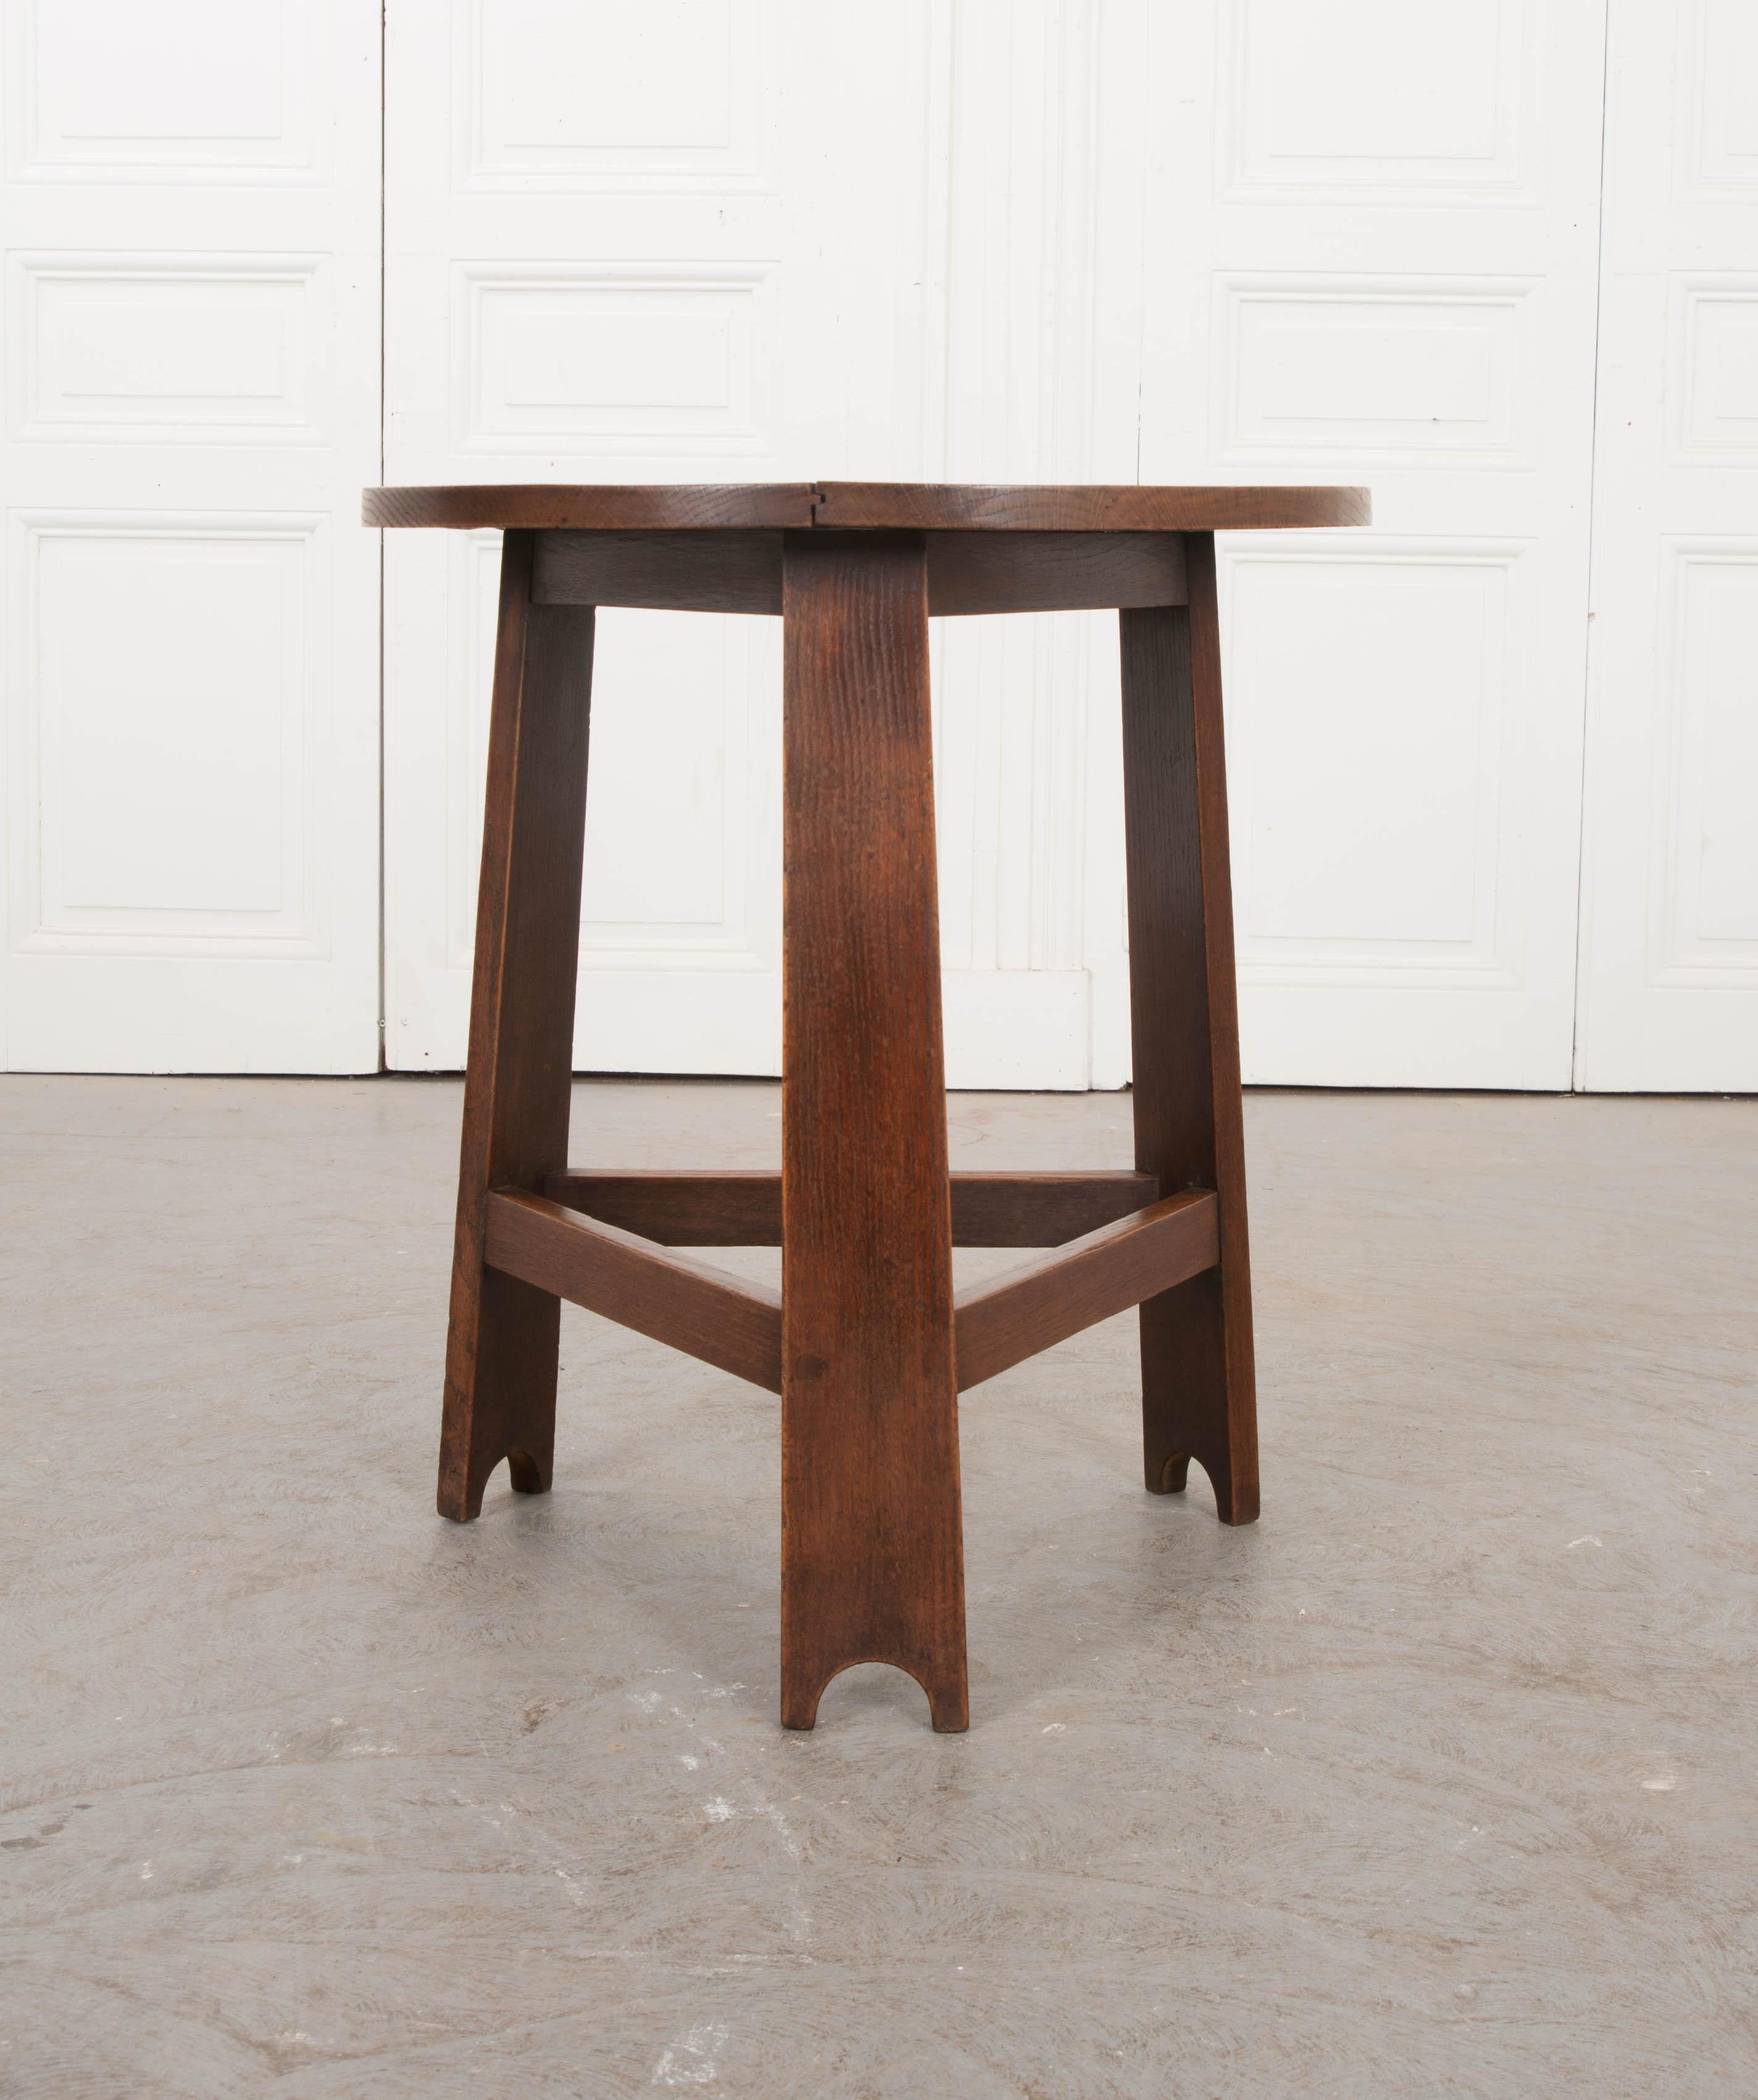 This charming Arts & Crafts movement oak cricket table, circa 1890, is from England and displays a lovely patina. A ‘cricket table’, originally created in the early 16th century, is an occasional table with a round top, set on top of 3 angled legs,